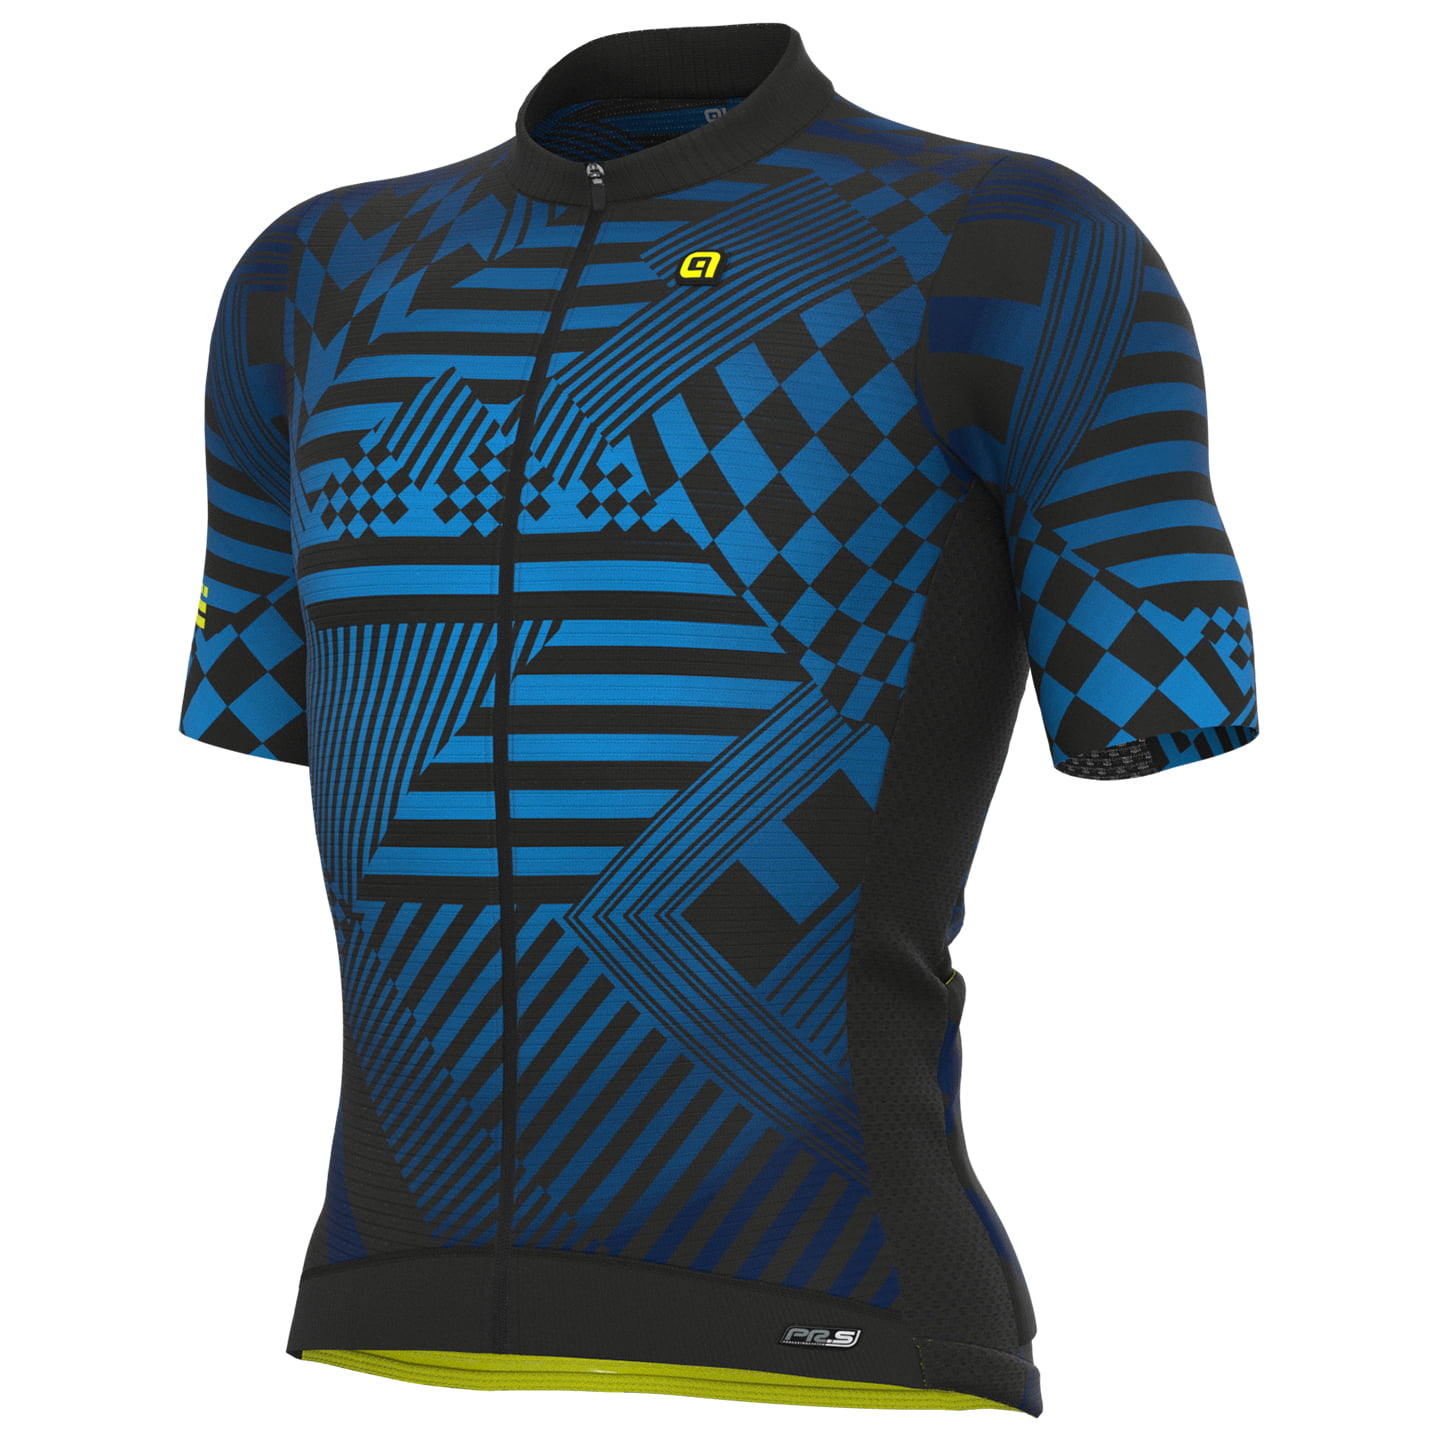 ALE Checkers Short Sleeve Jersey Short Sleeve Jersey, for men, size M, Cycling jersey, Cycling clothing